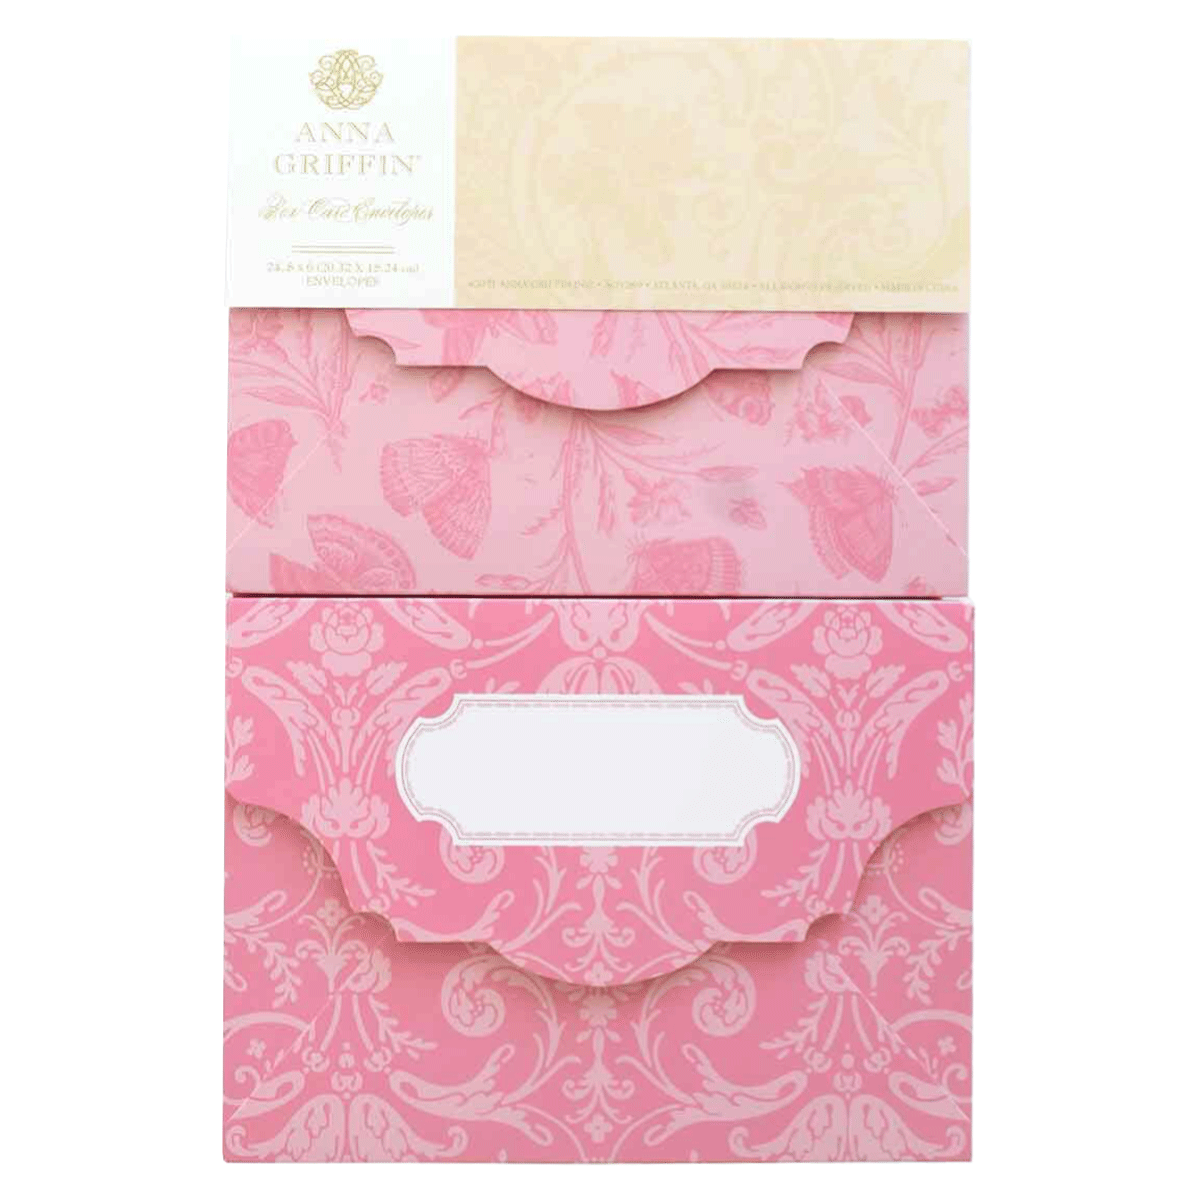 a pink envelope with a white label on it.